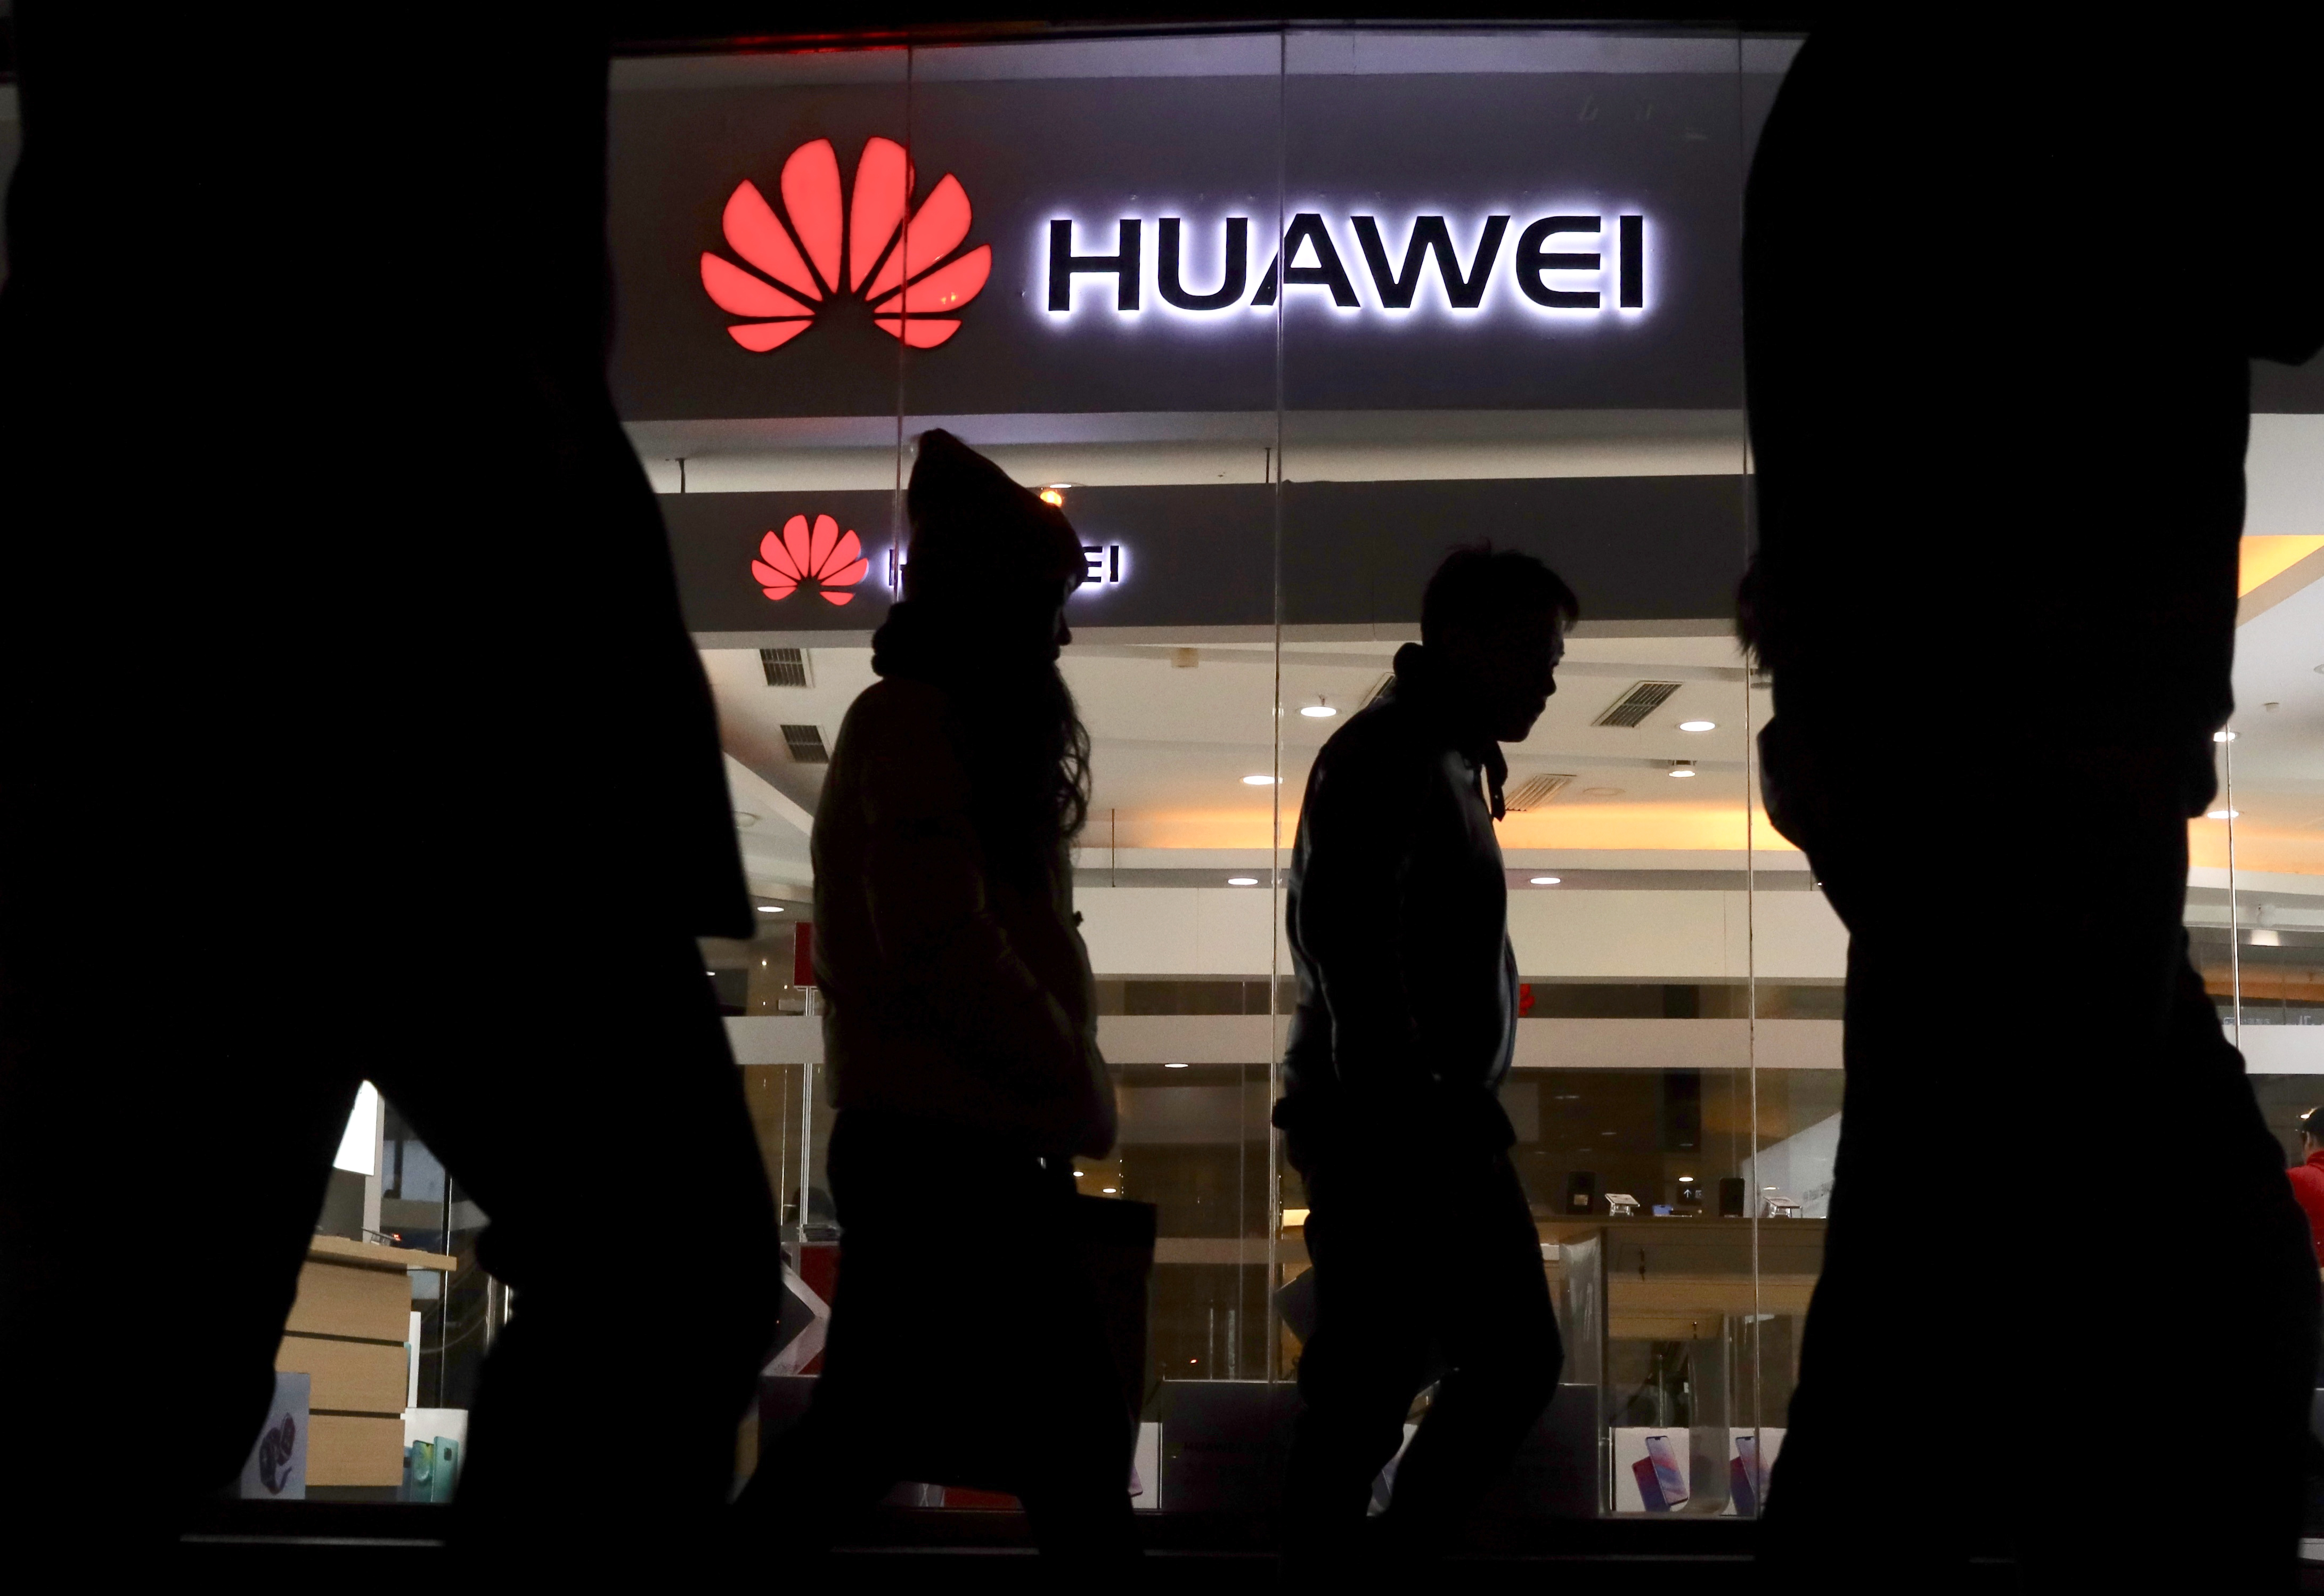 jammer kit kat os - Executive’s Arrest, Security Worries Stymie Huawei’s Reach